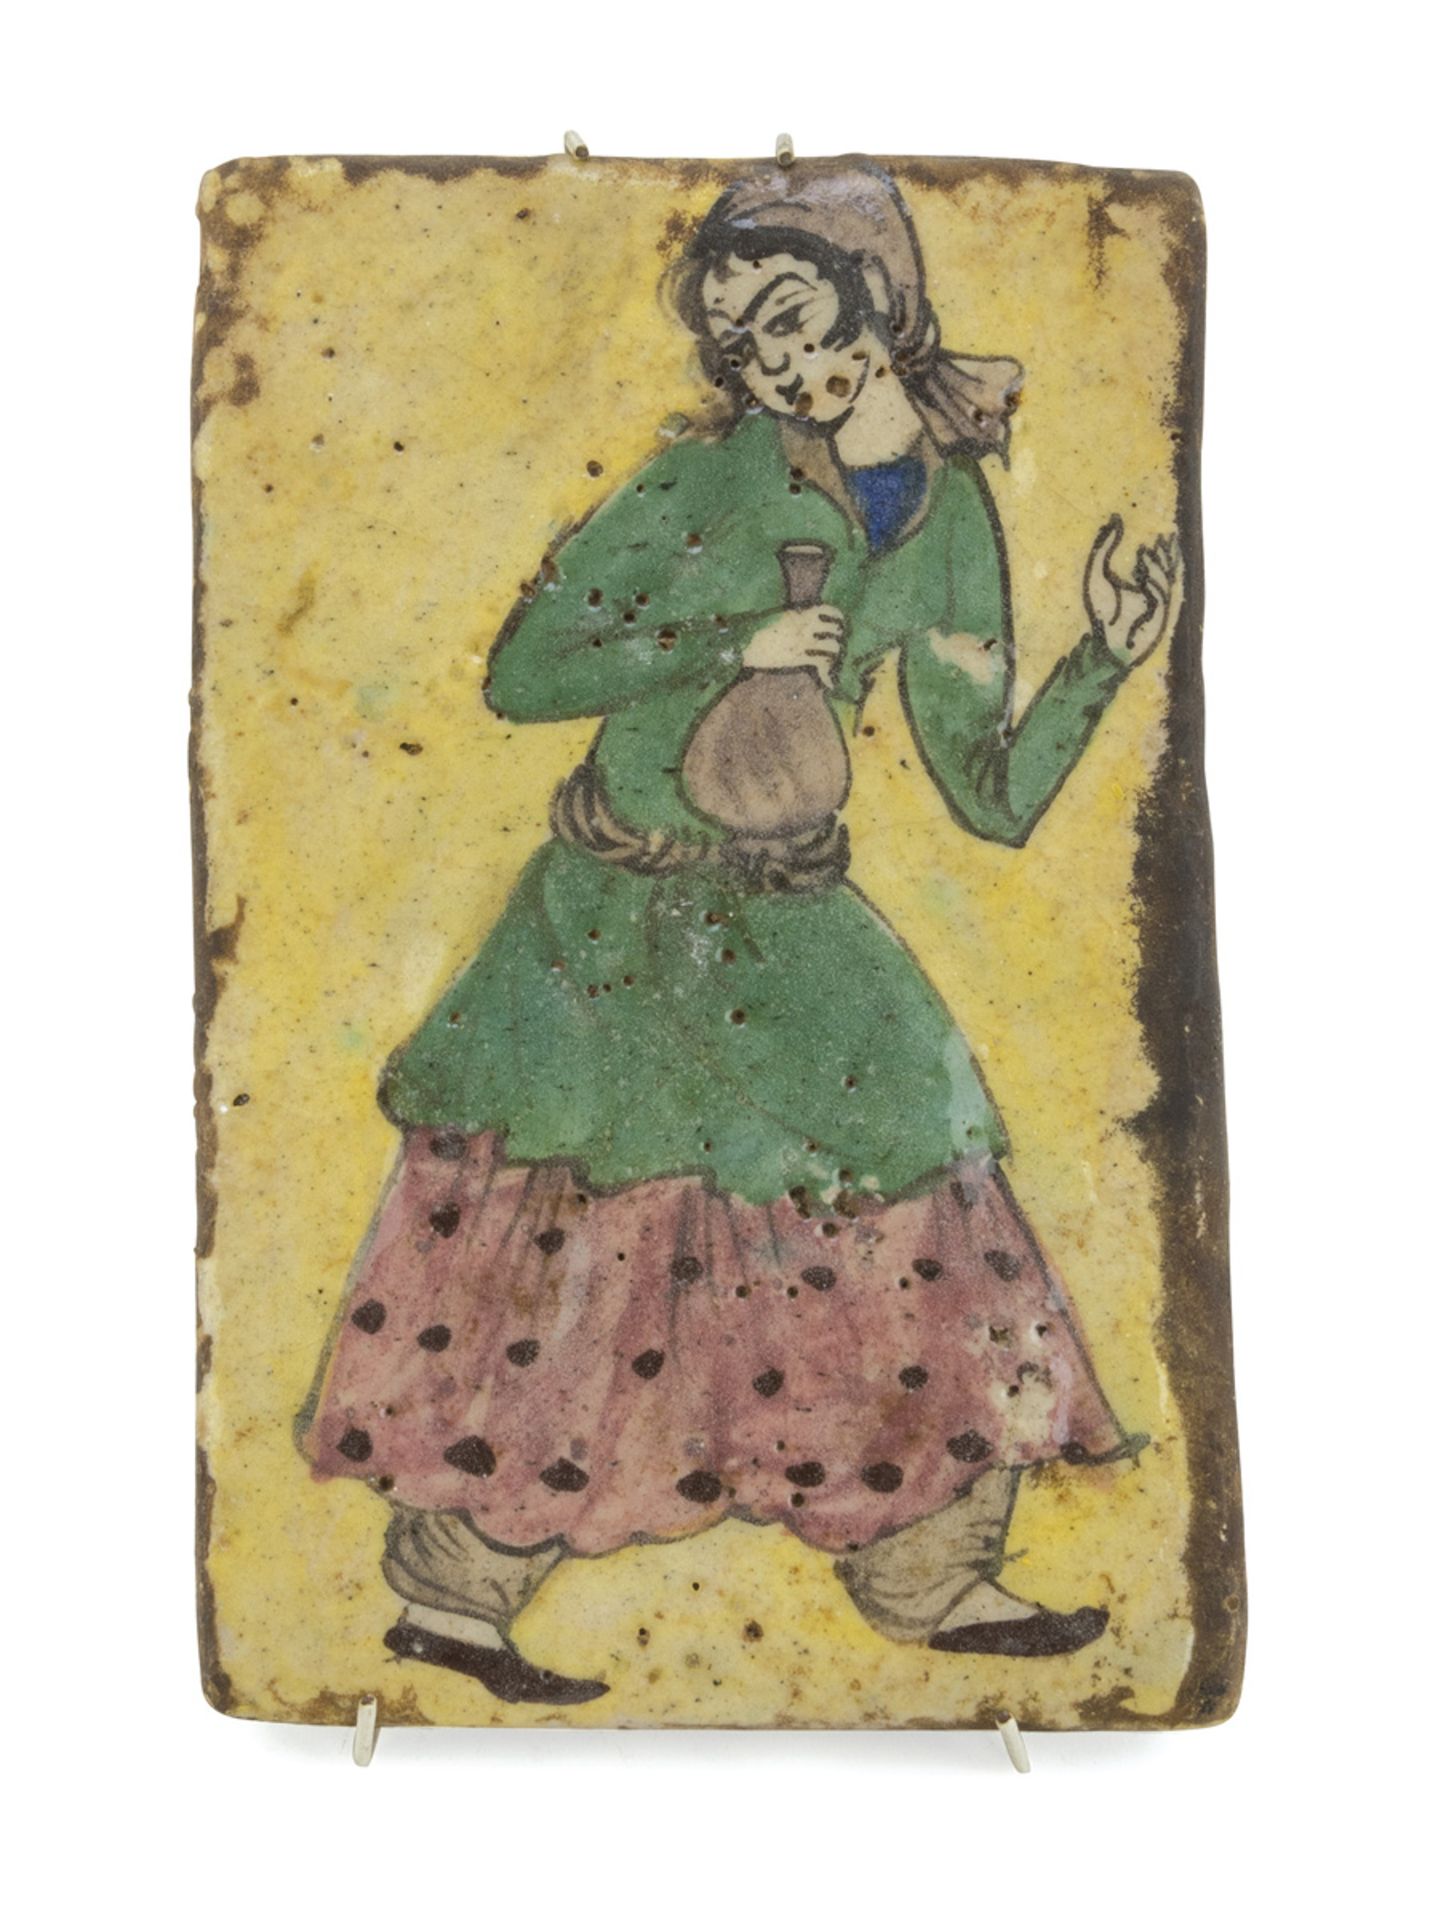 TILE IN CERAMICS IN POLYCHROME ENAMELS PERSIA END 19TH EARLY 20TH CENTURY